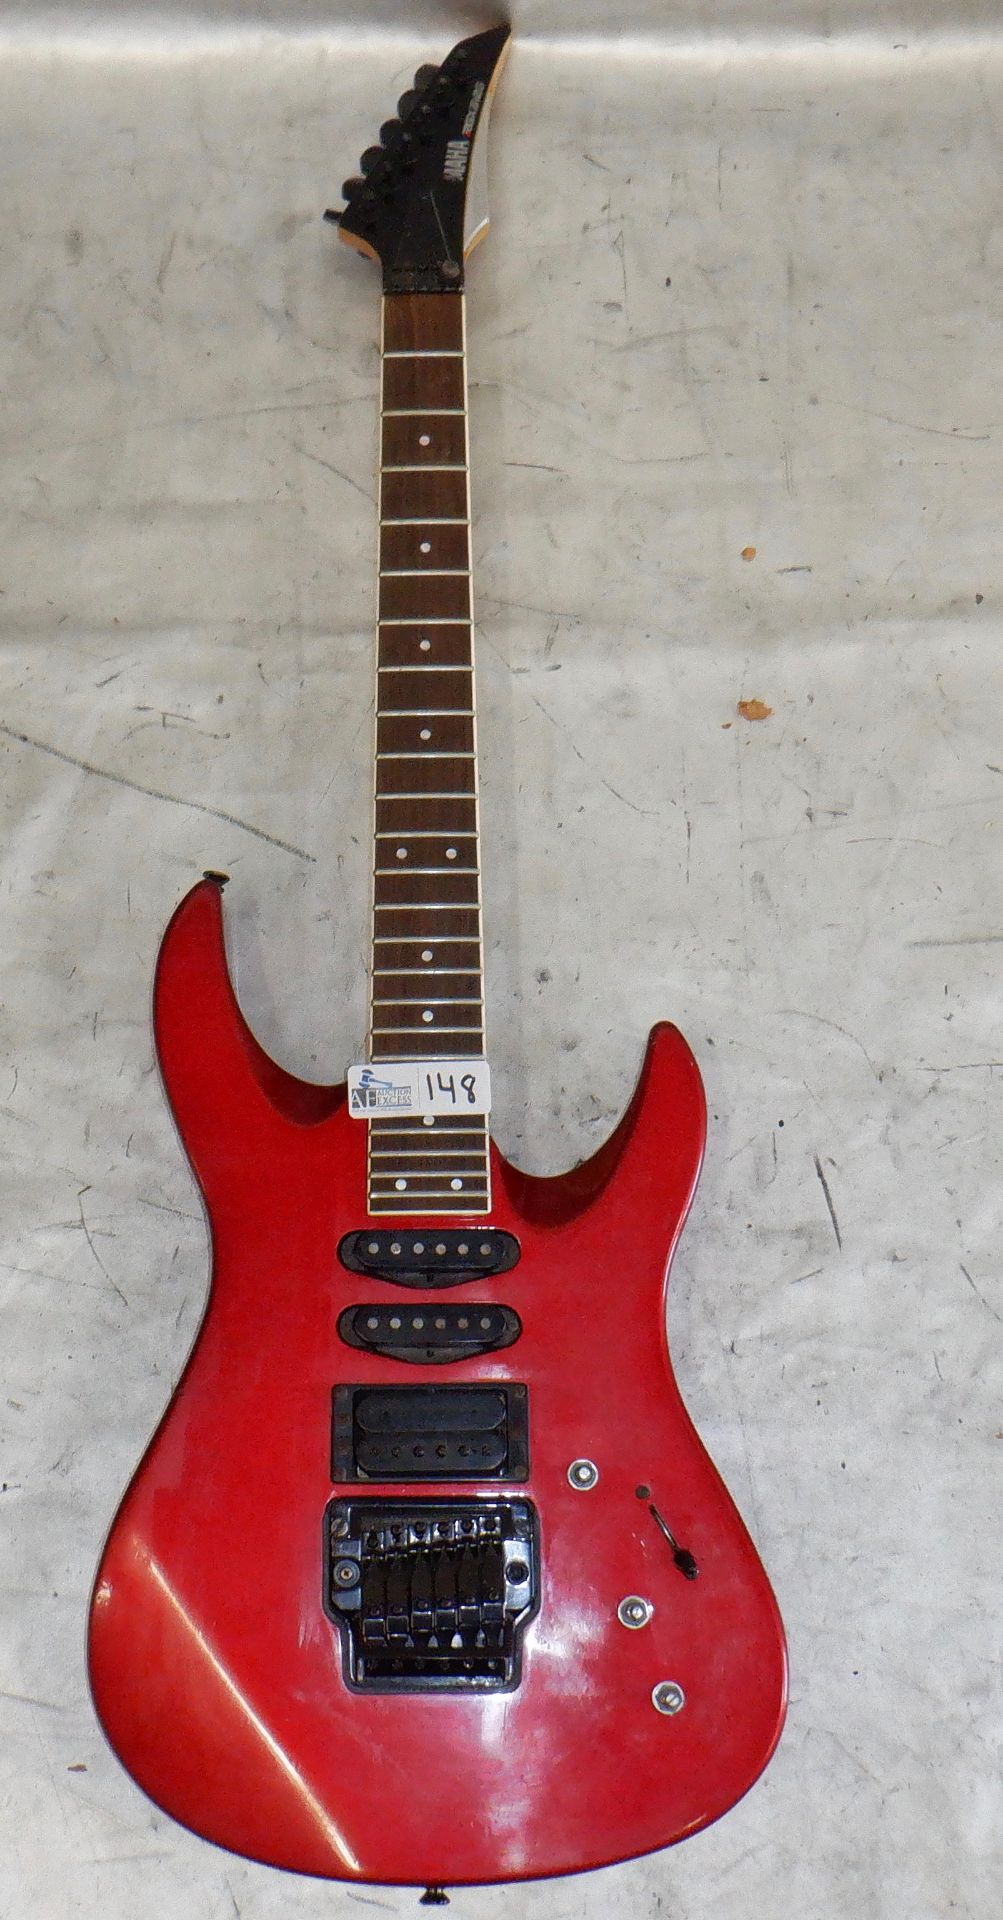 YAMAHA RGX6125 ELECTRIC GUITAR IN CASE - Image 2 of 7